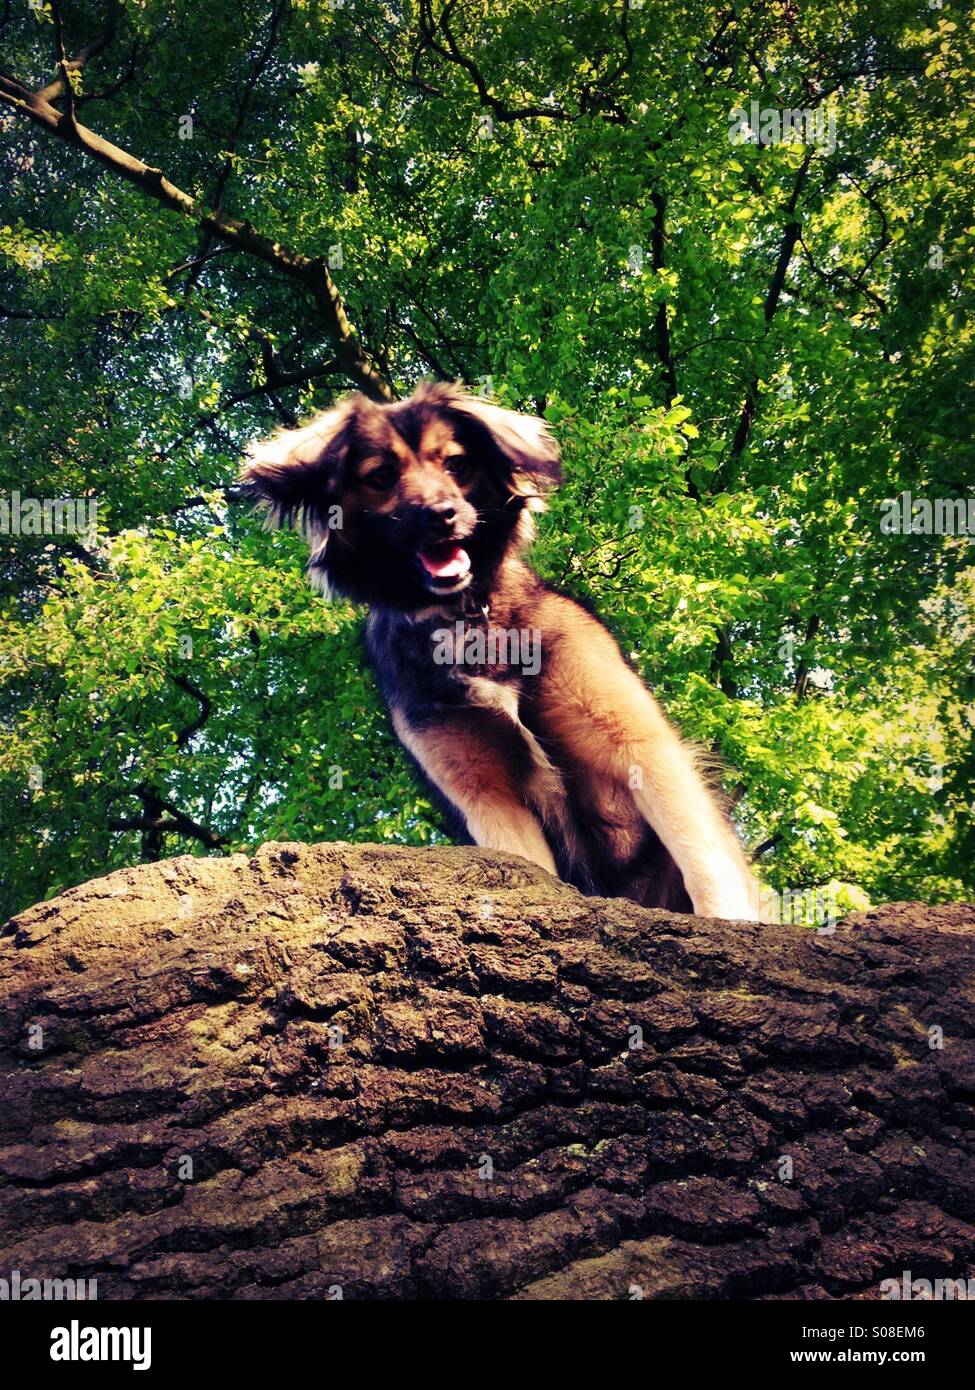 My dog peering down at me from a tree. Stock Photo